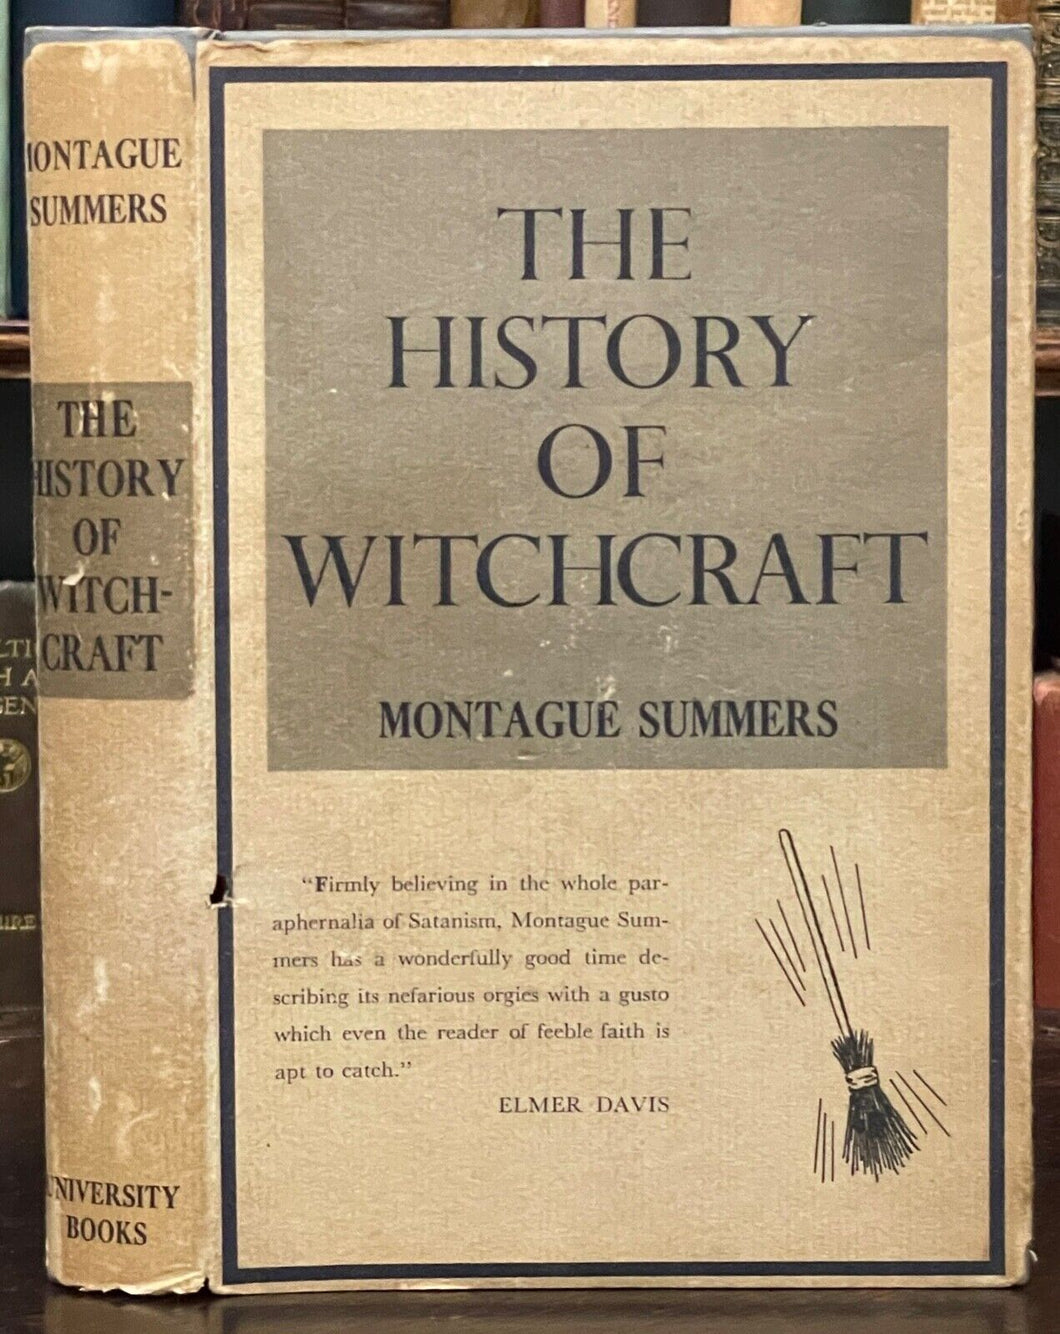 HISTORY OF WITCHCRAFT AND DEMONOLOGY - M. Summers, 1956 - WITCHES DEMONS SORCERY